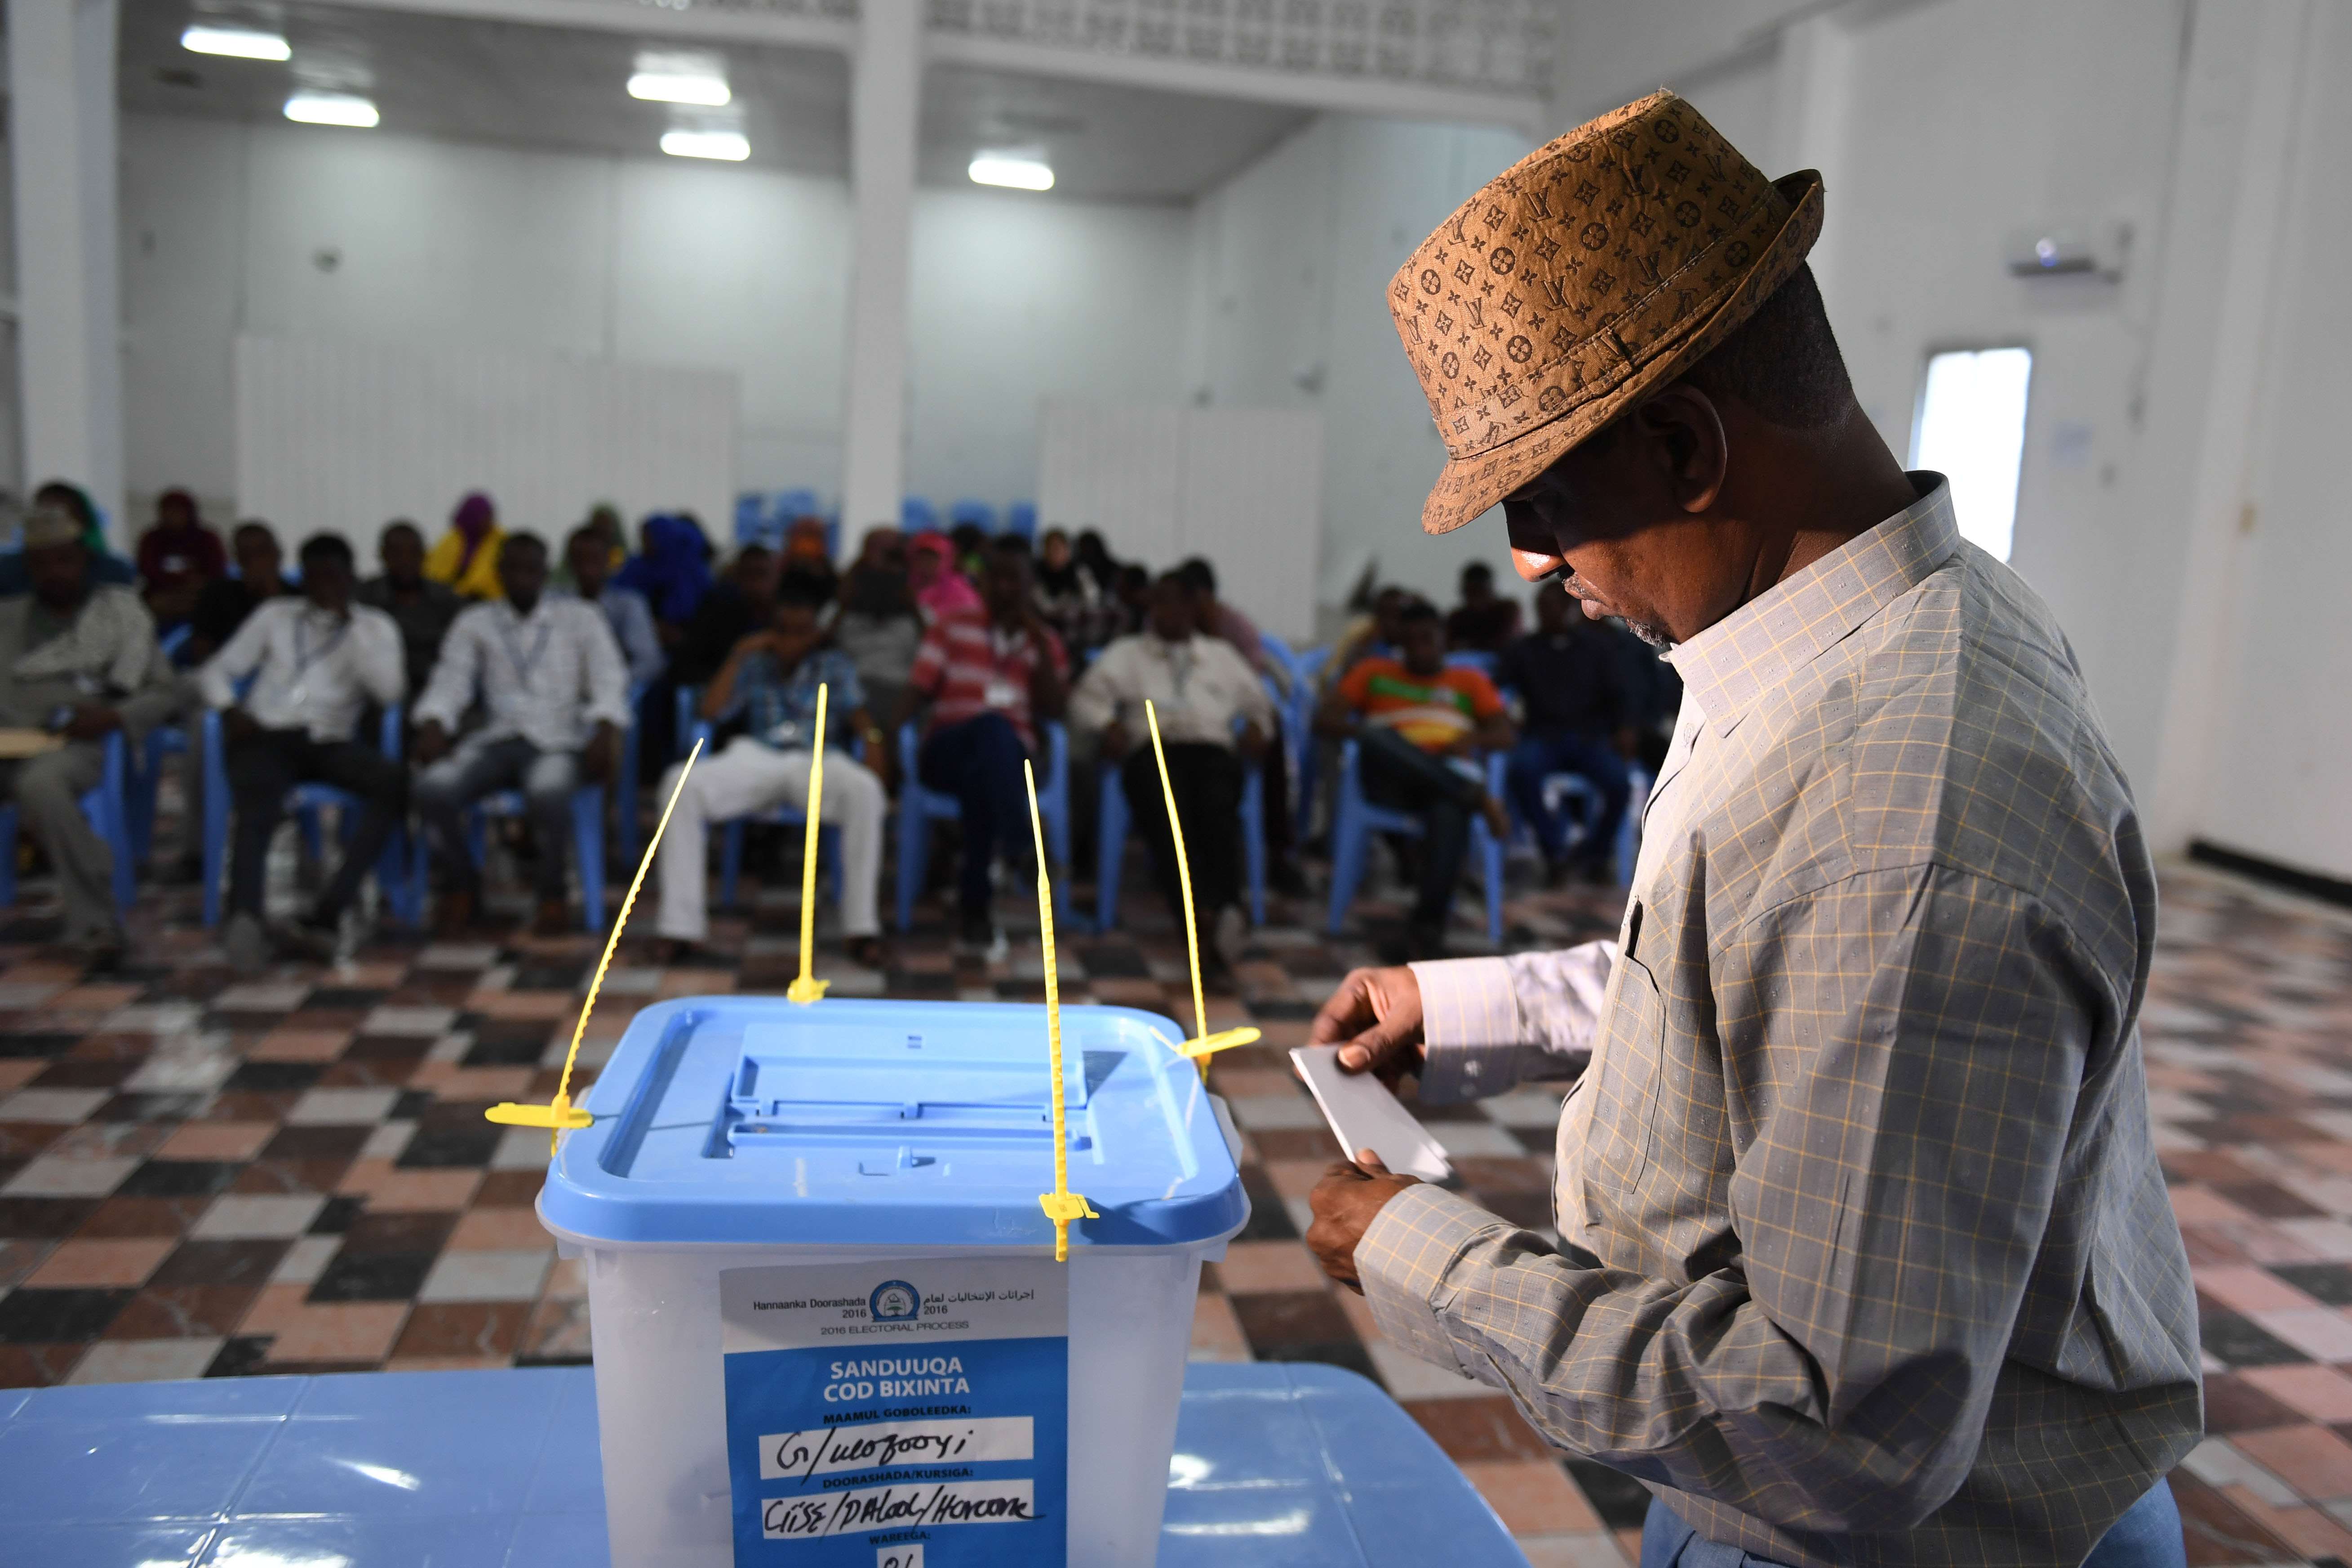 A delegate from Somaliland votes during the electoral process in Mogadishu, Somalia, on 19 December 2016. (Photo by Ilyas Ahmed / AMISOM / Public domain)